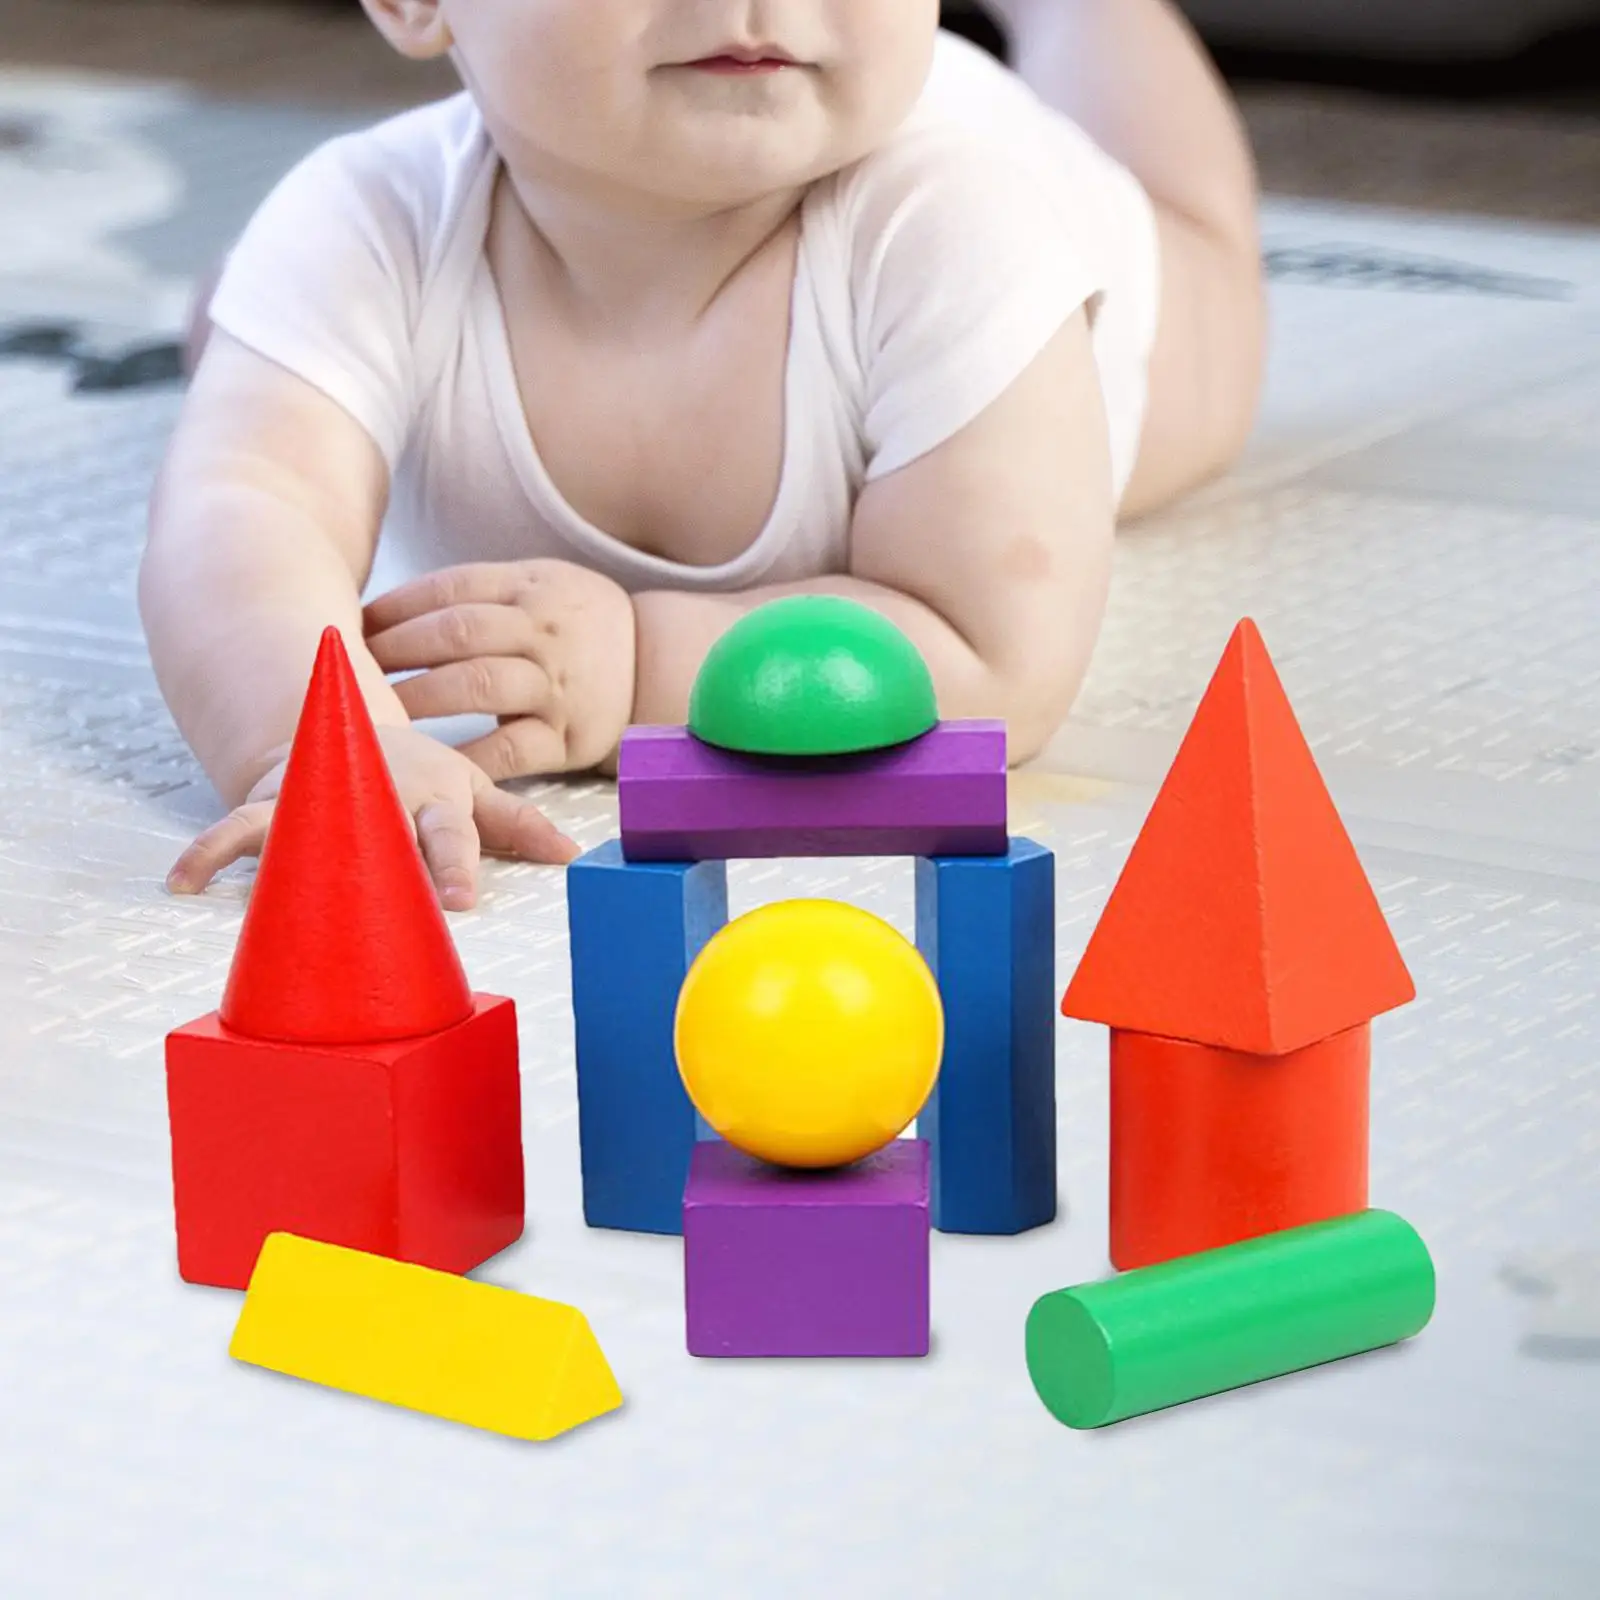 Wood 3D Shapes Geometric Solids Educational for Activity Early Education